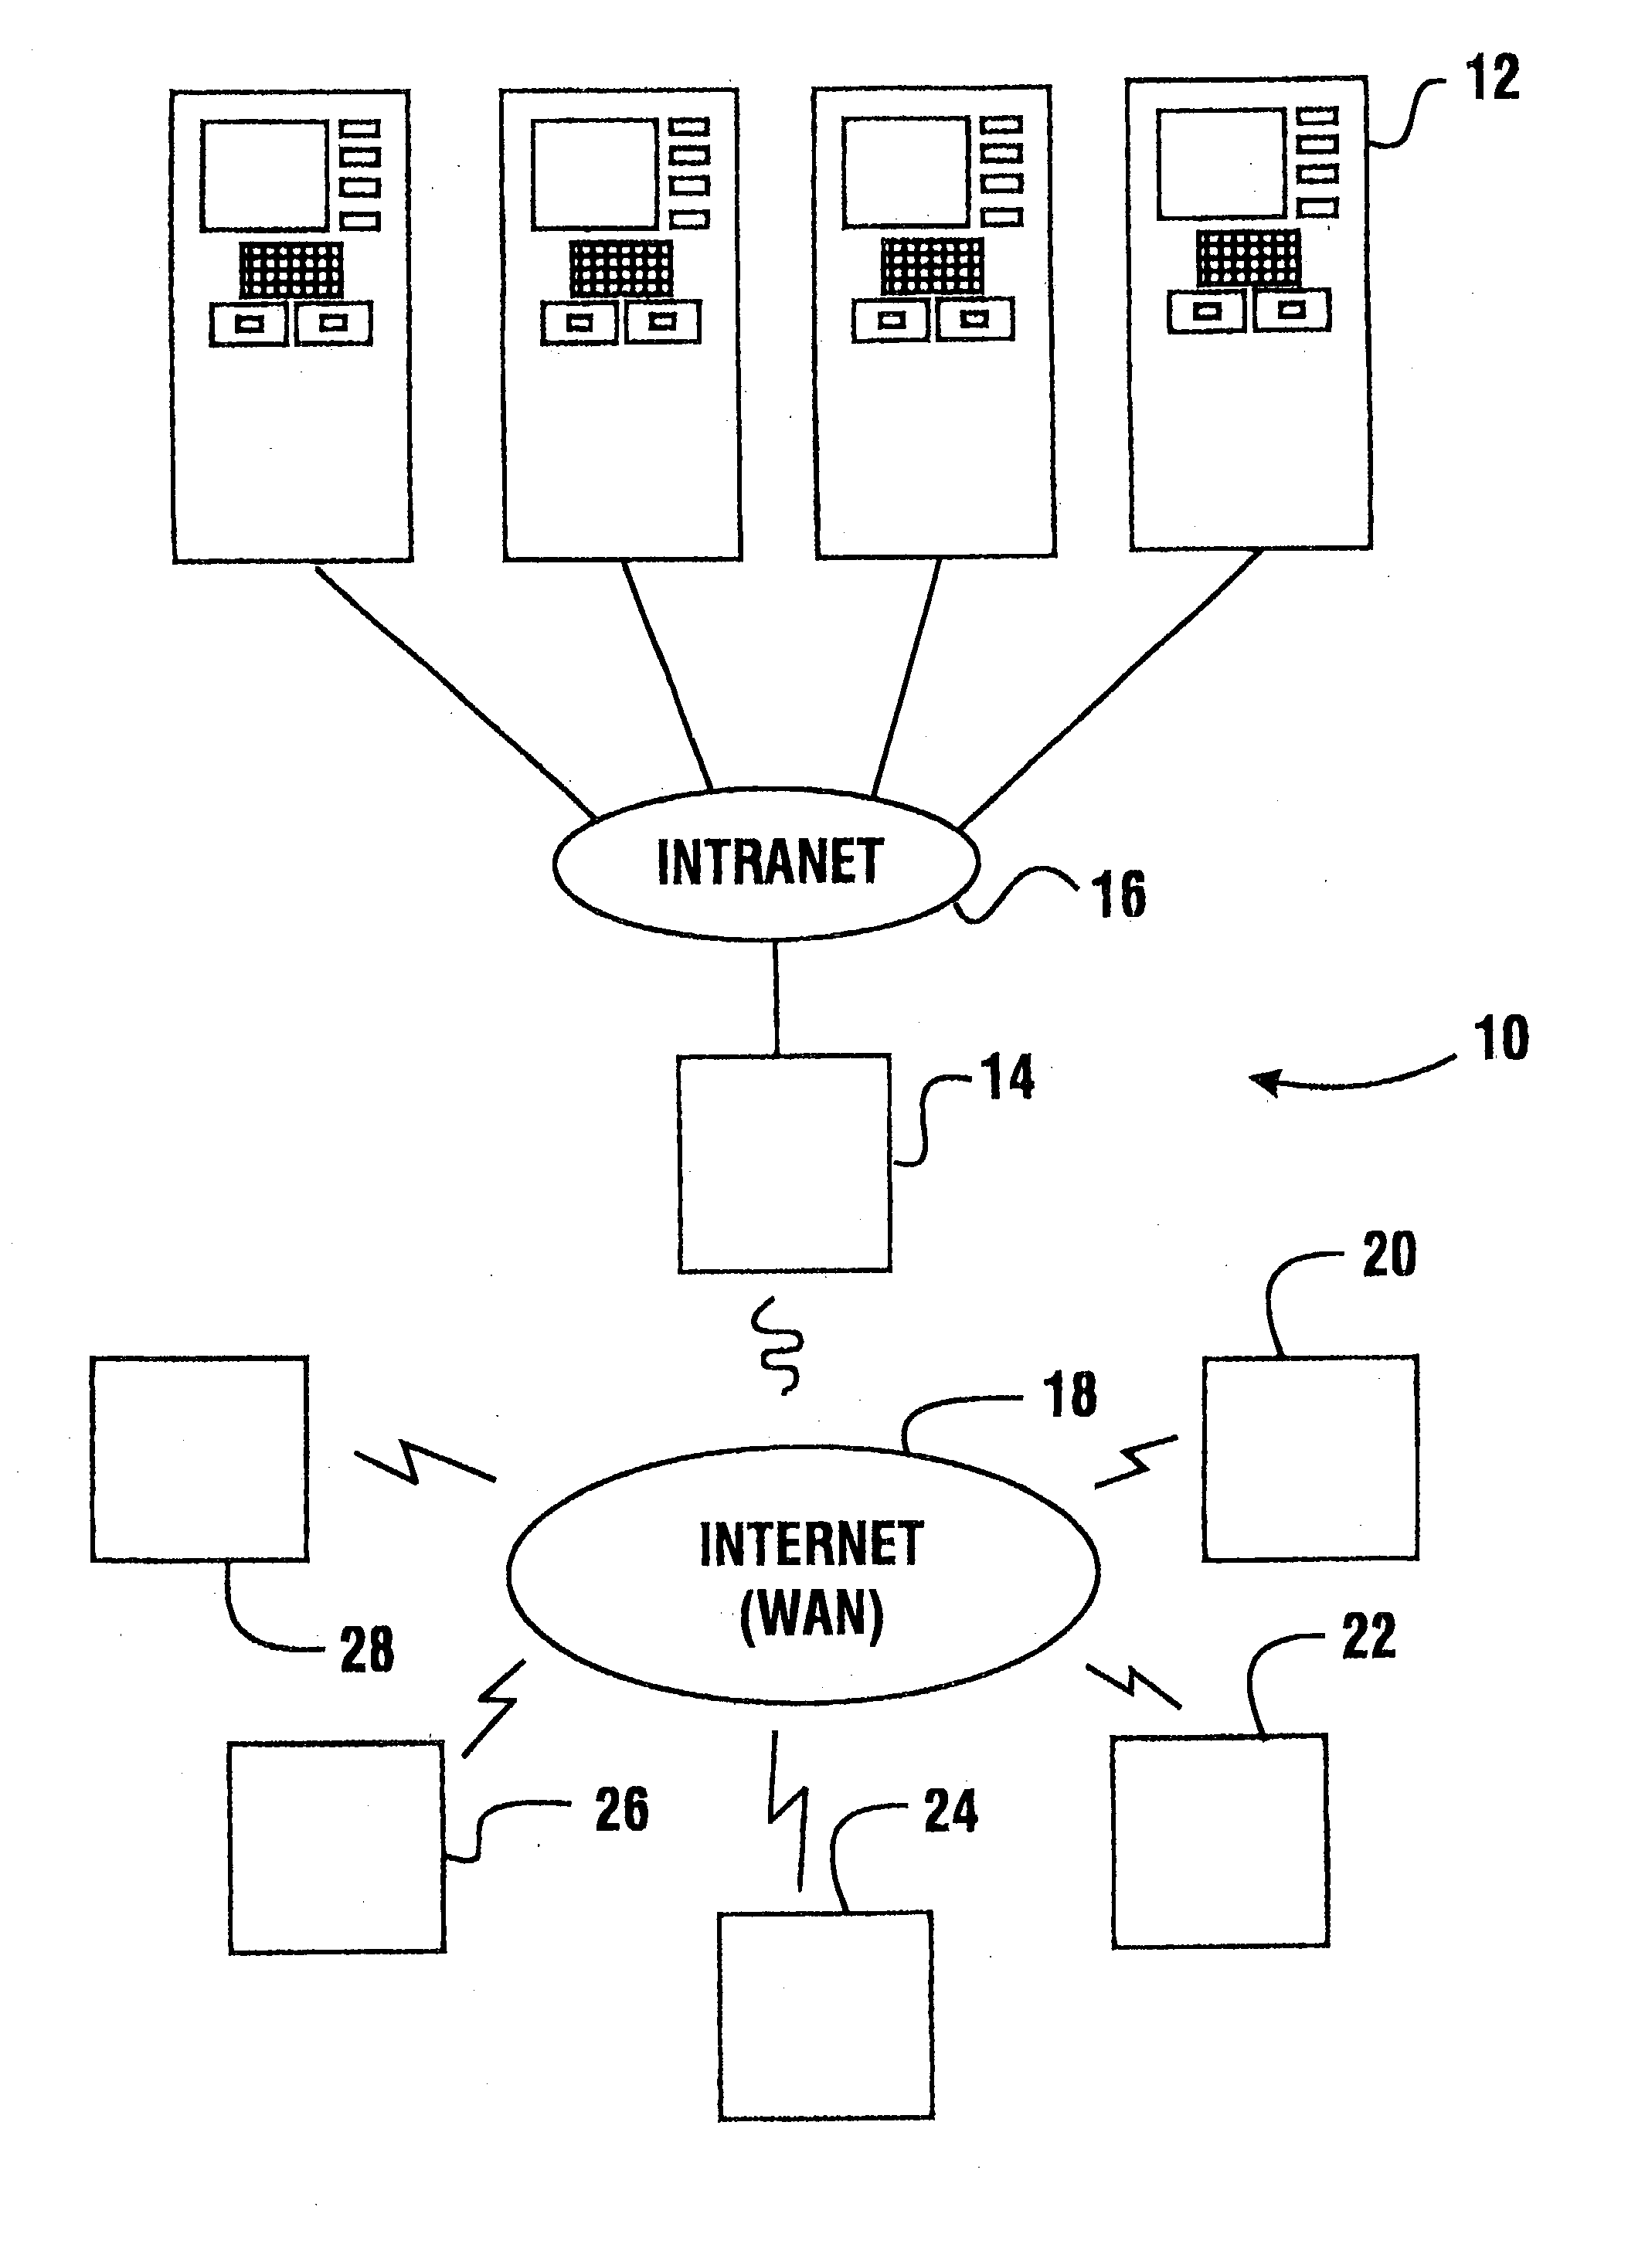 Application service provider and automated transaction machine system and method